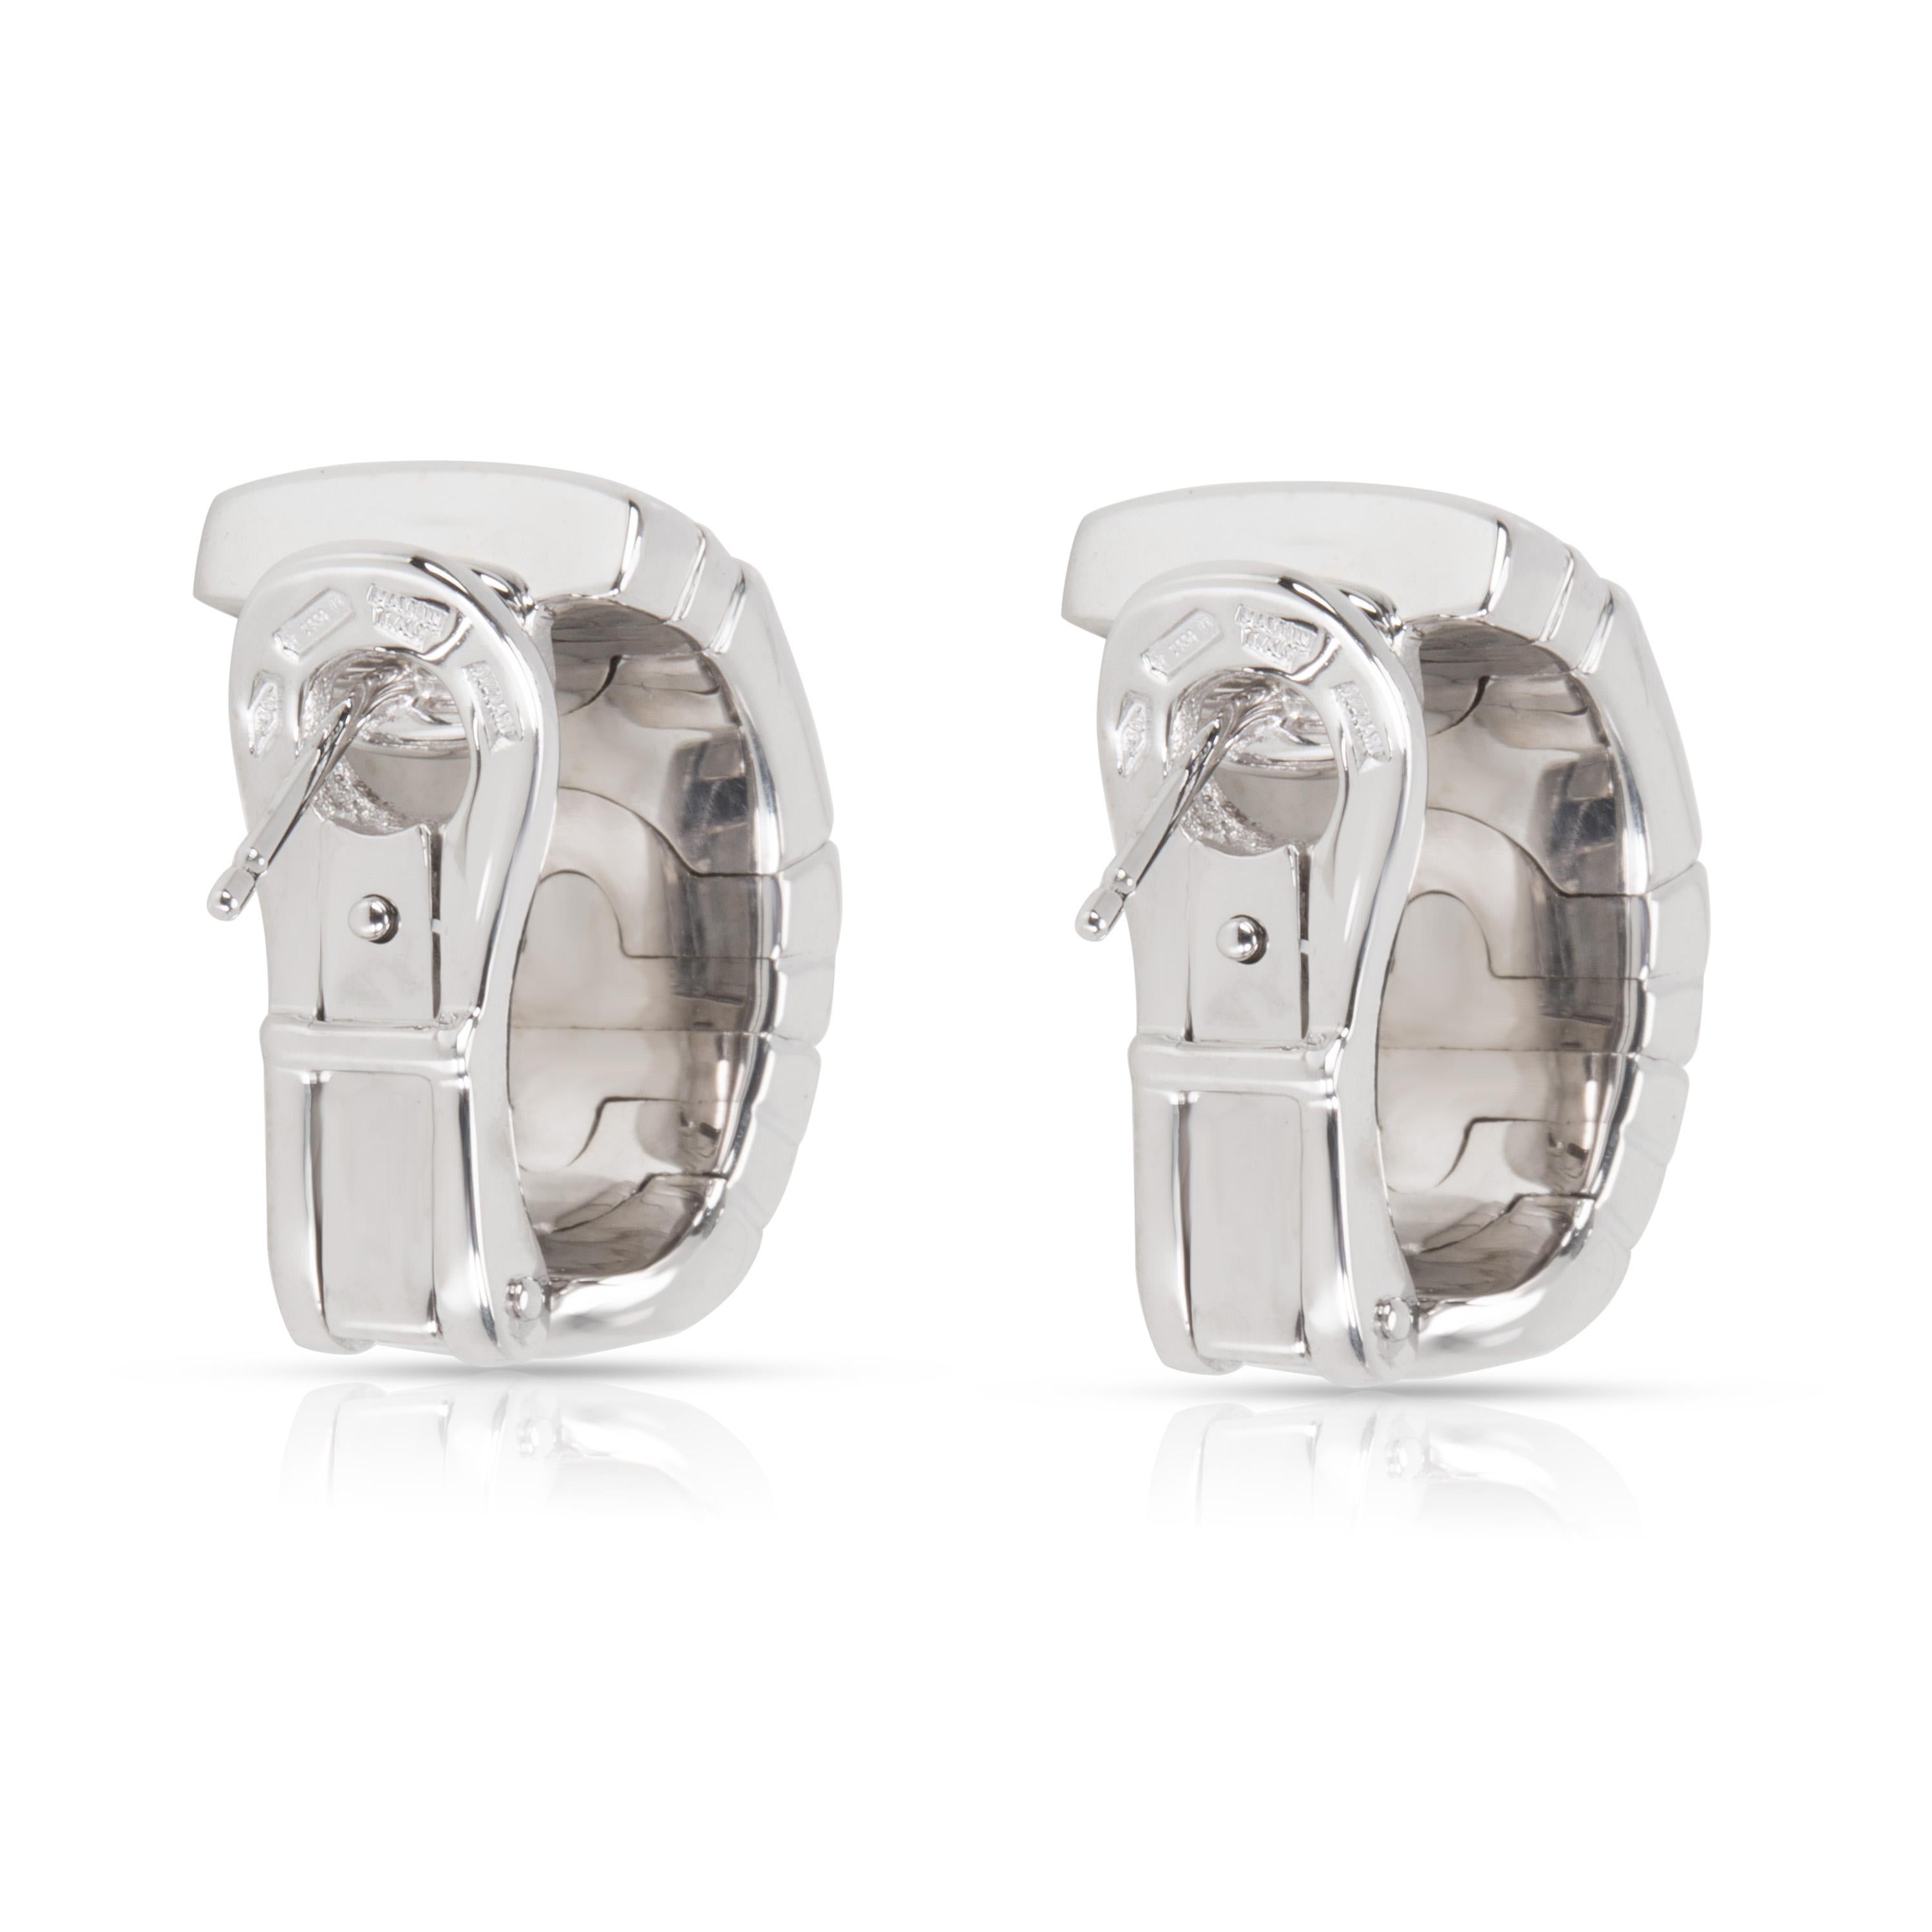 
Bulgari Parentesi Diamond Earrings in 18K White Gold 0.5 CTW

PRIMARY DETAILS
SKU: 097725
Listing Title: Bulgari Parentesi Diamond Earrings in 18K White Gold 0.5 CTW
Condition Description: Retails for 7000 USD. In excellent condition and recently